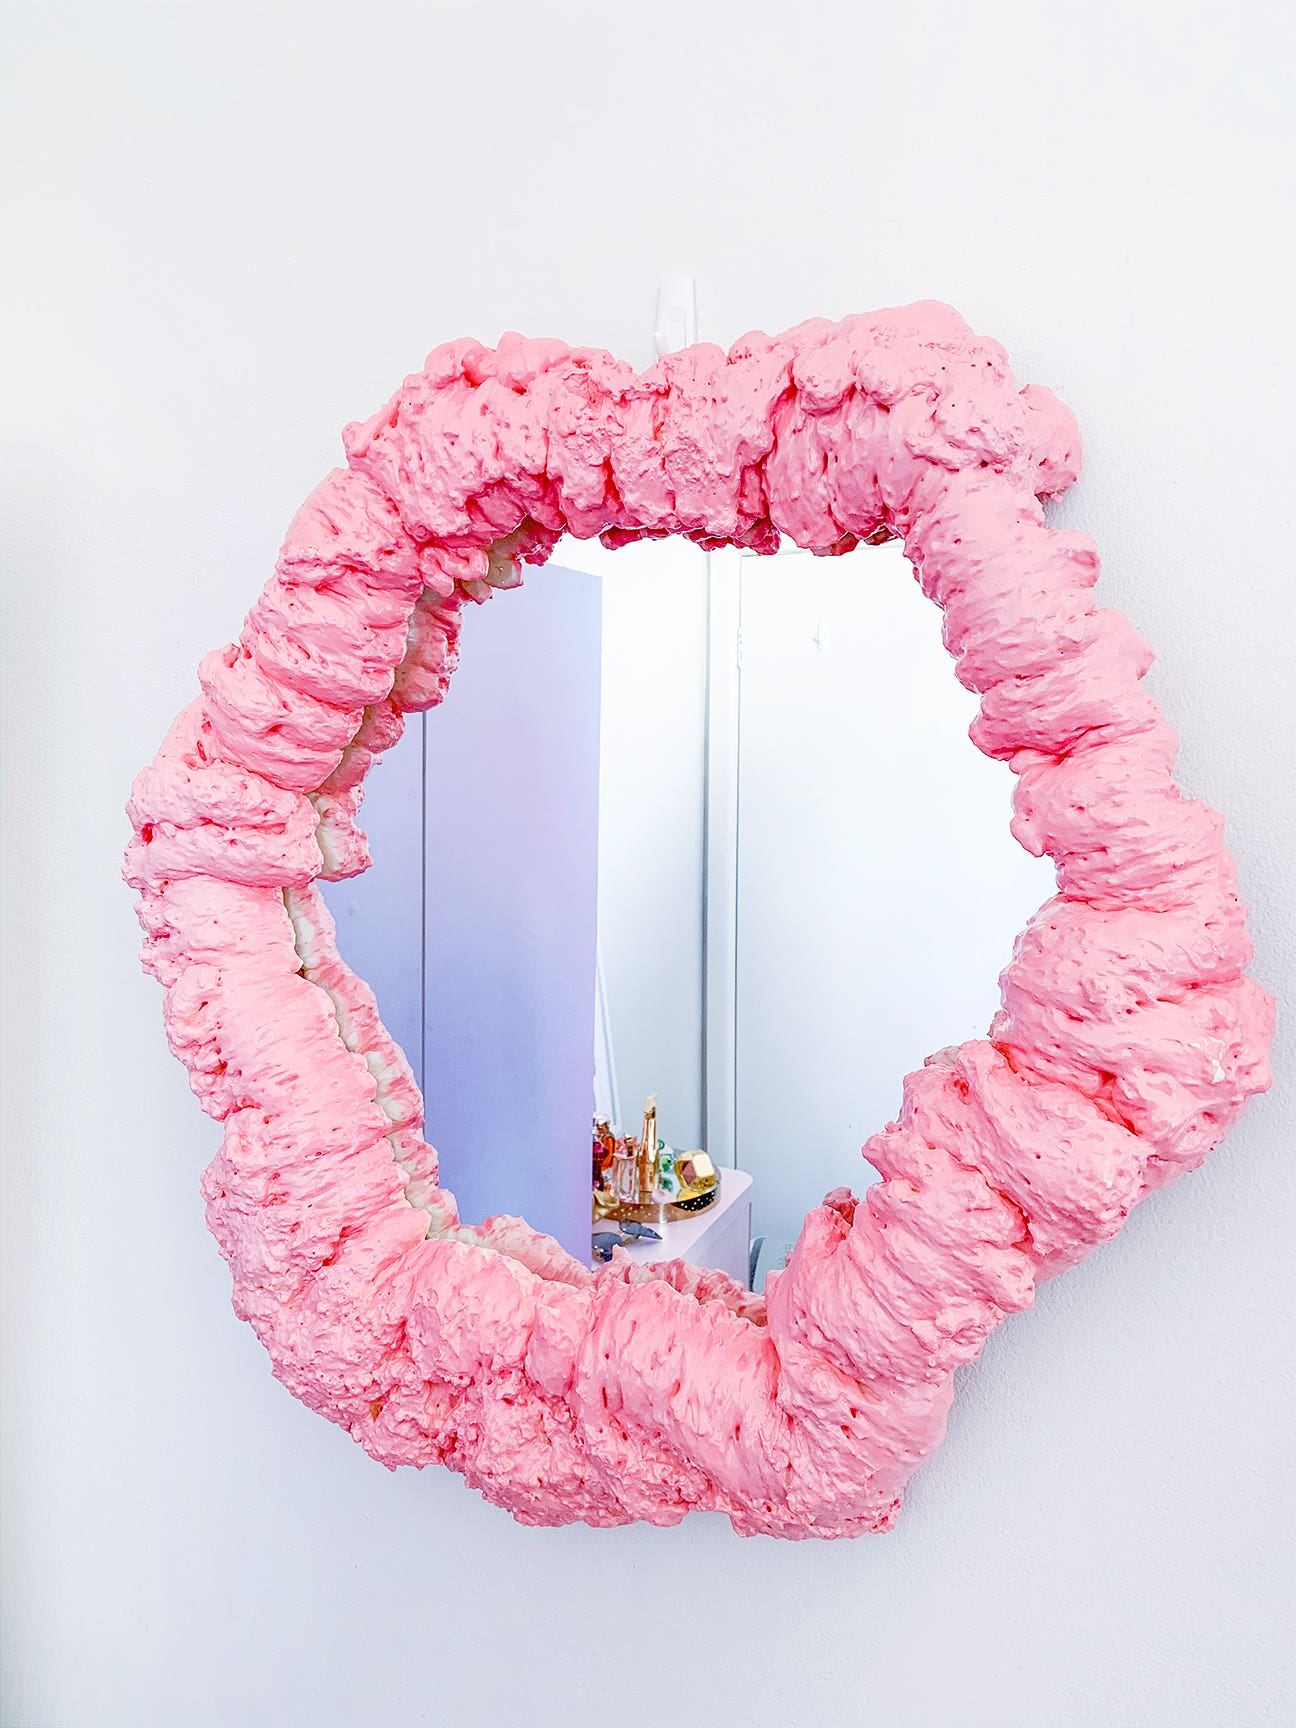 This Cotton Candy Mirror Is a Spray-Foam DIY in Disguise